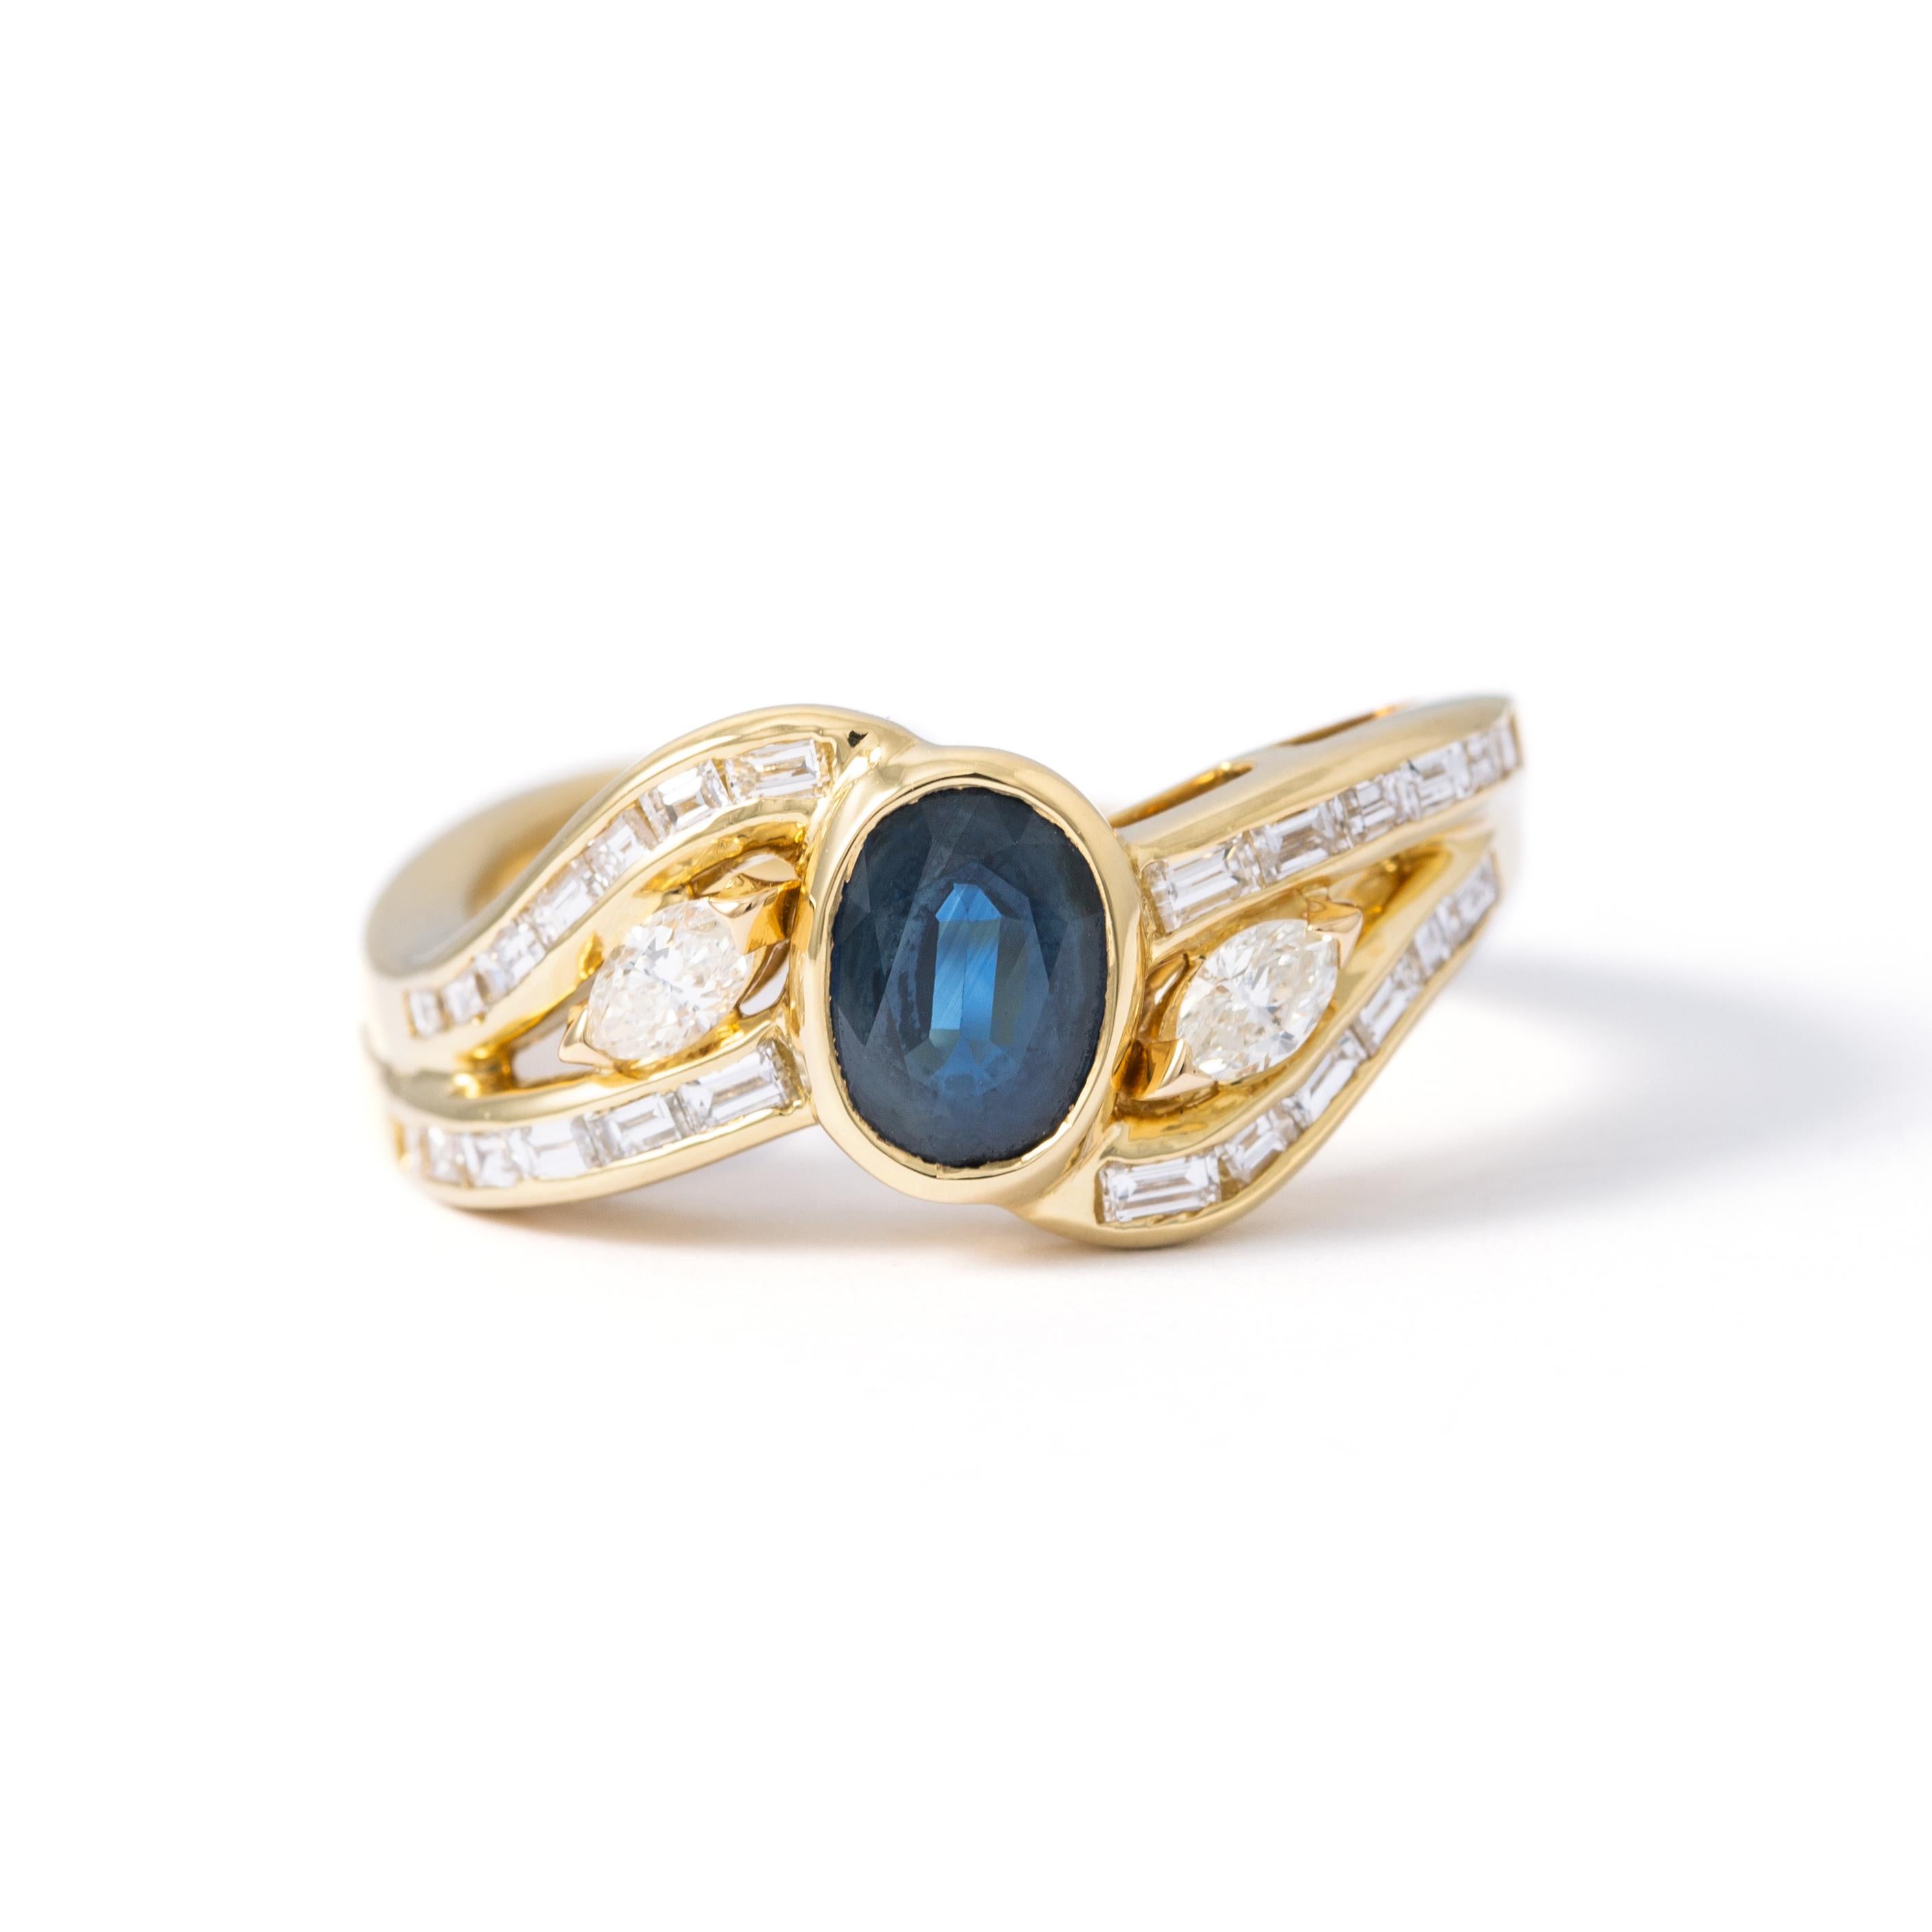 Ring in 18kt yellow gold set with one oval cut sapphire 1.01 cts, 2 oval cut diamonds 0.18 cts and 25 square diamonds 0.46 cts Size 52